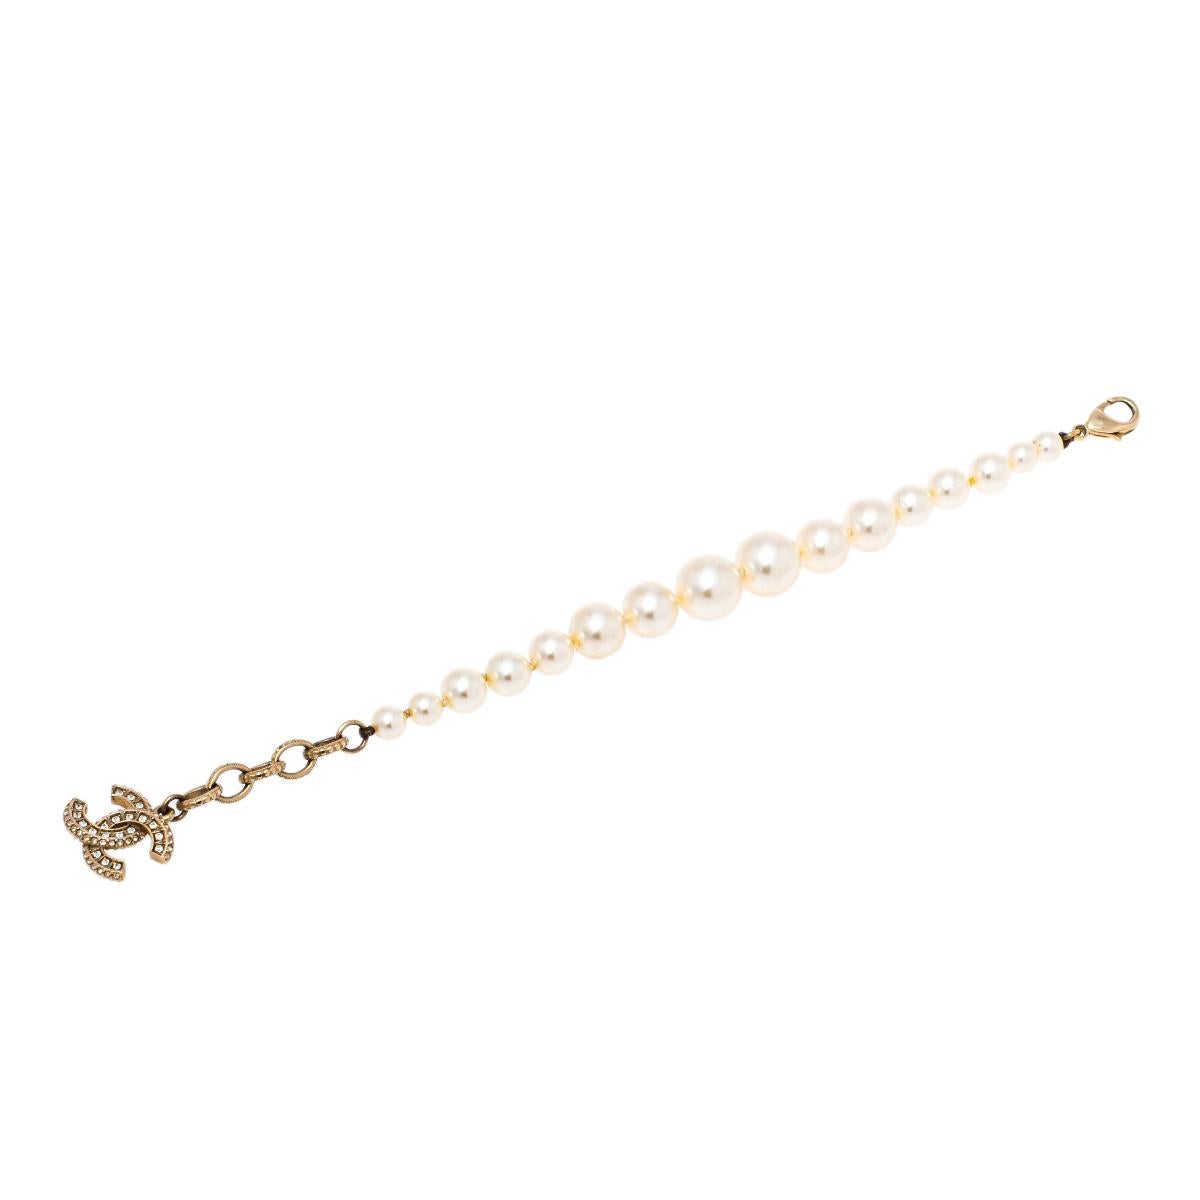 This simple and elegant bracelet from Chanel features a long strand of faux pearls and will adorn your wrist beautifully. Rendered in gold-tone metal, the bracelet is accompanied by an embellished 'CC' logo charm. This piece will become a